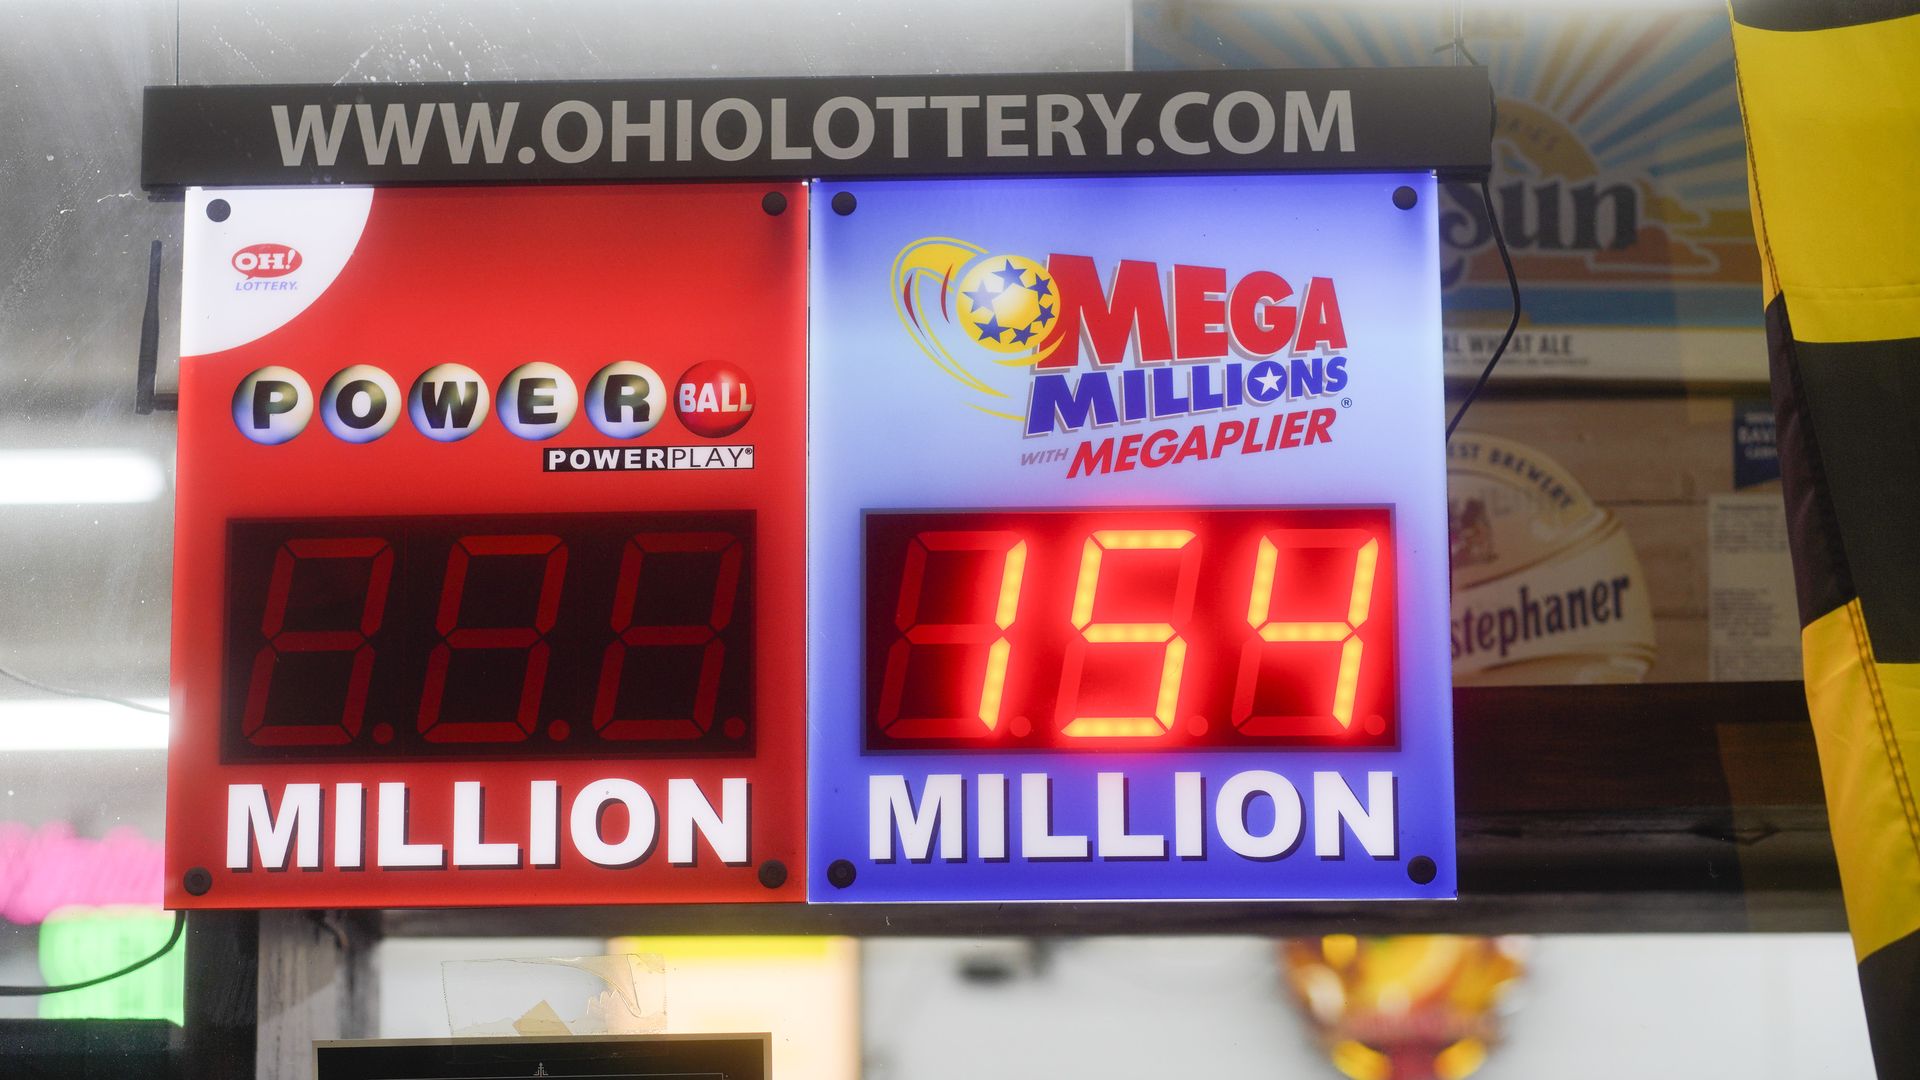 A neon sign advertising a $154 million payout for the Mega Millions Ohio lottery game. 